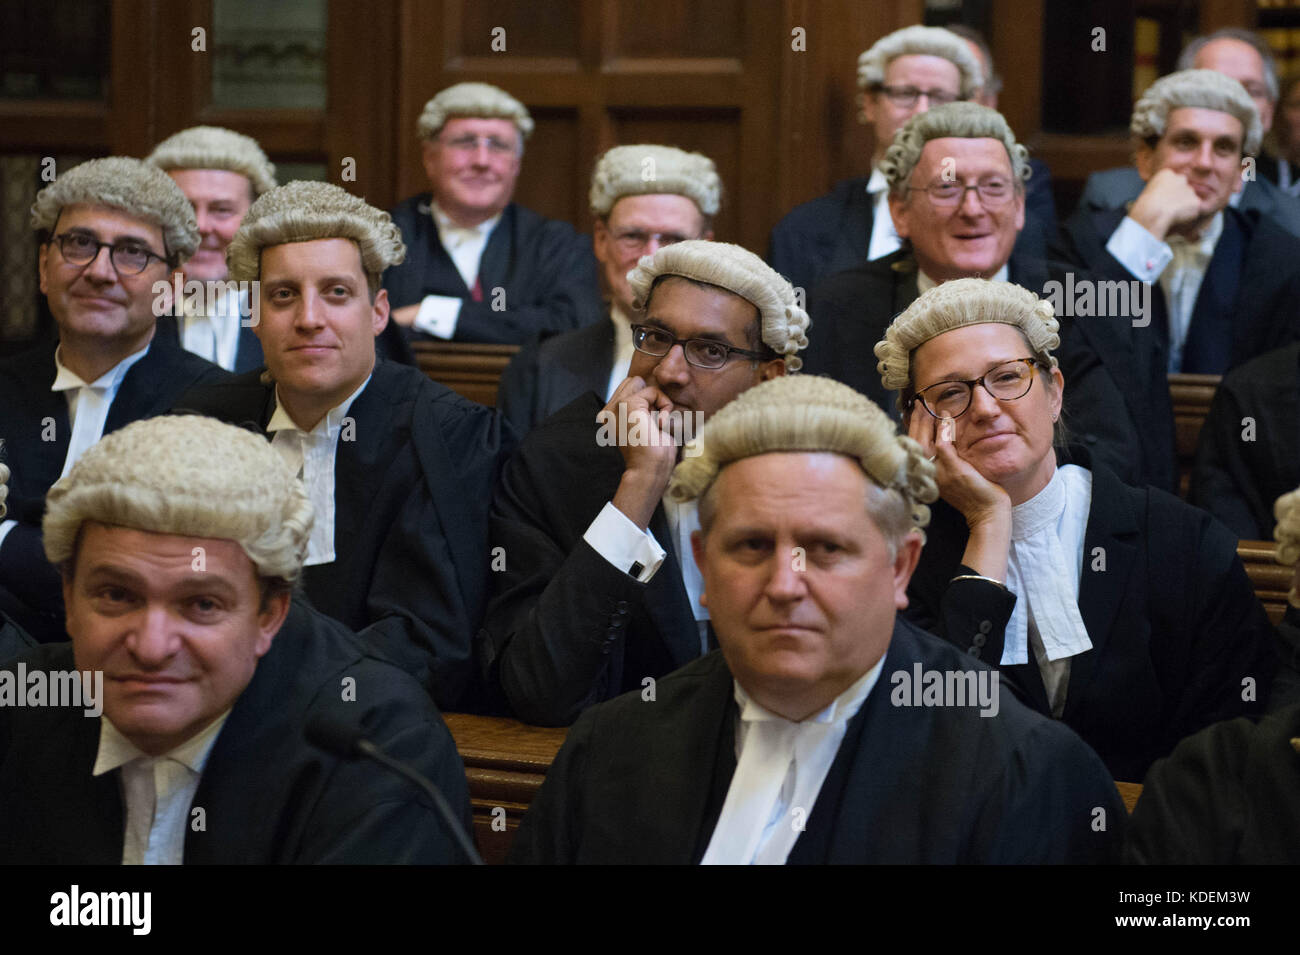 High Court judges attend a valediction for Mr Justice Bodey, one of the most senior family court judges in England and Wales, at the Royal Courts of Justice in London. Stock Photo